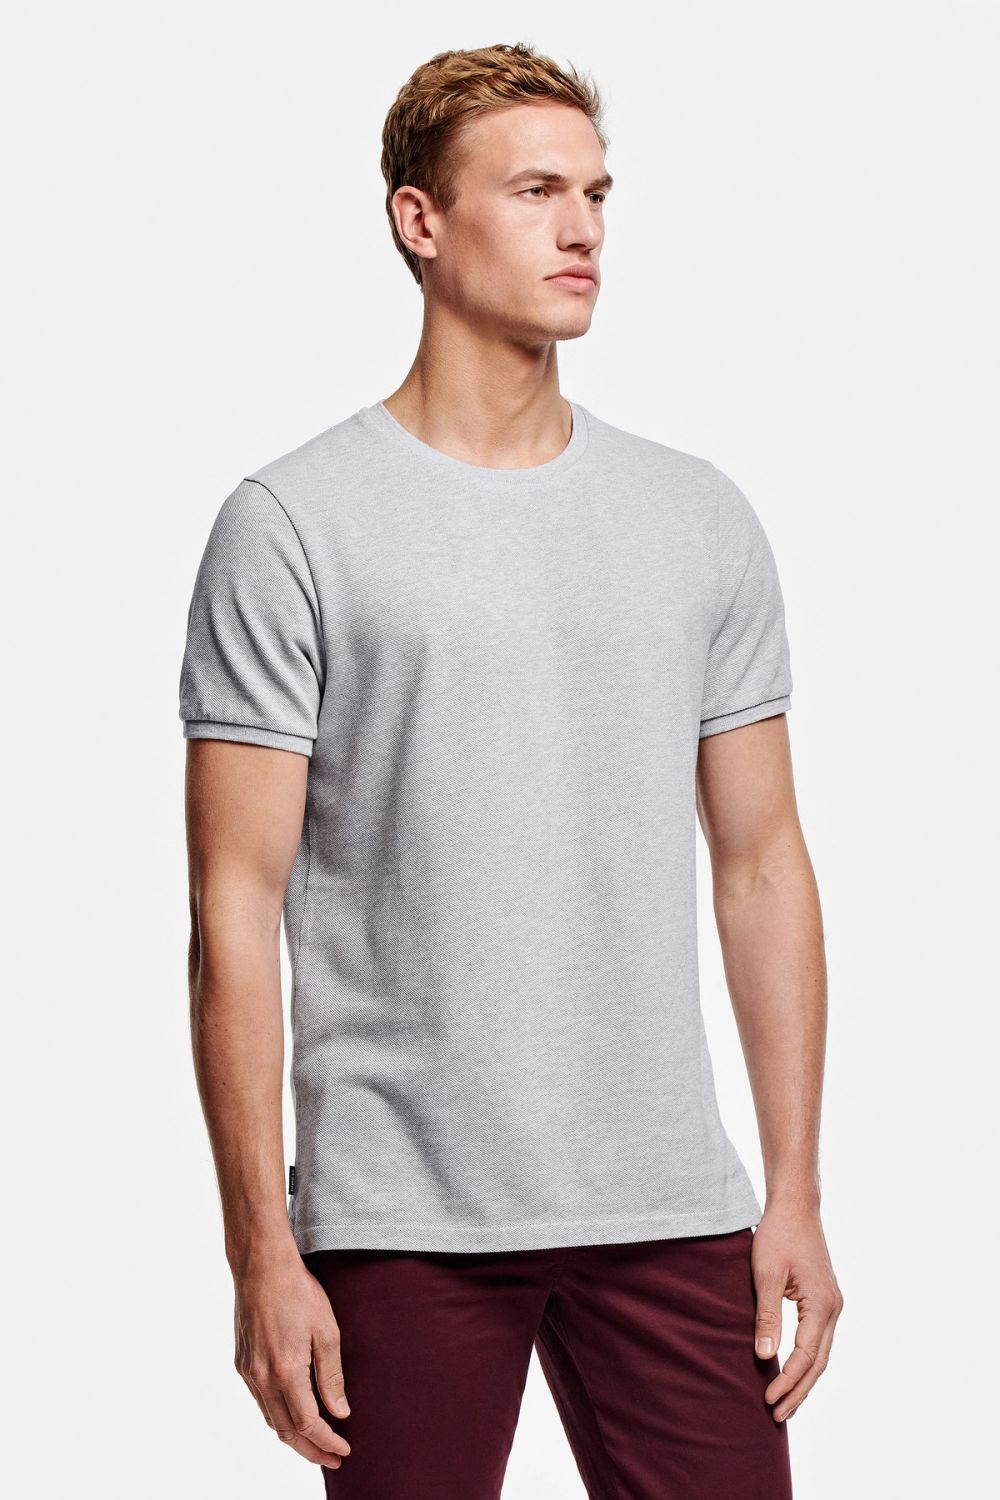 Oysters - The Piqué Tee